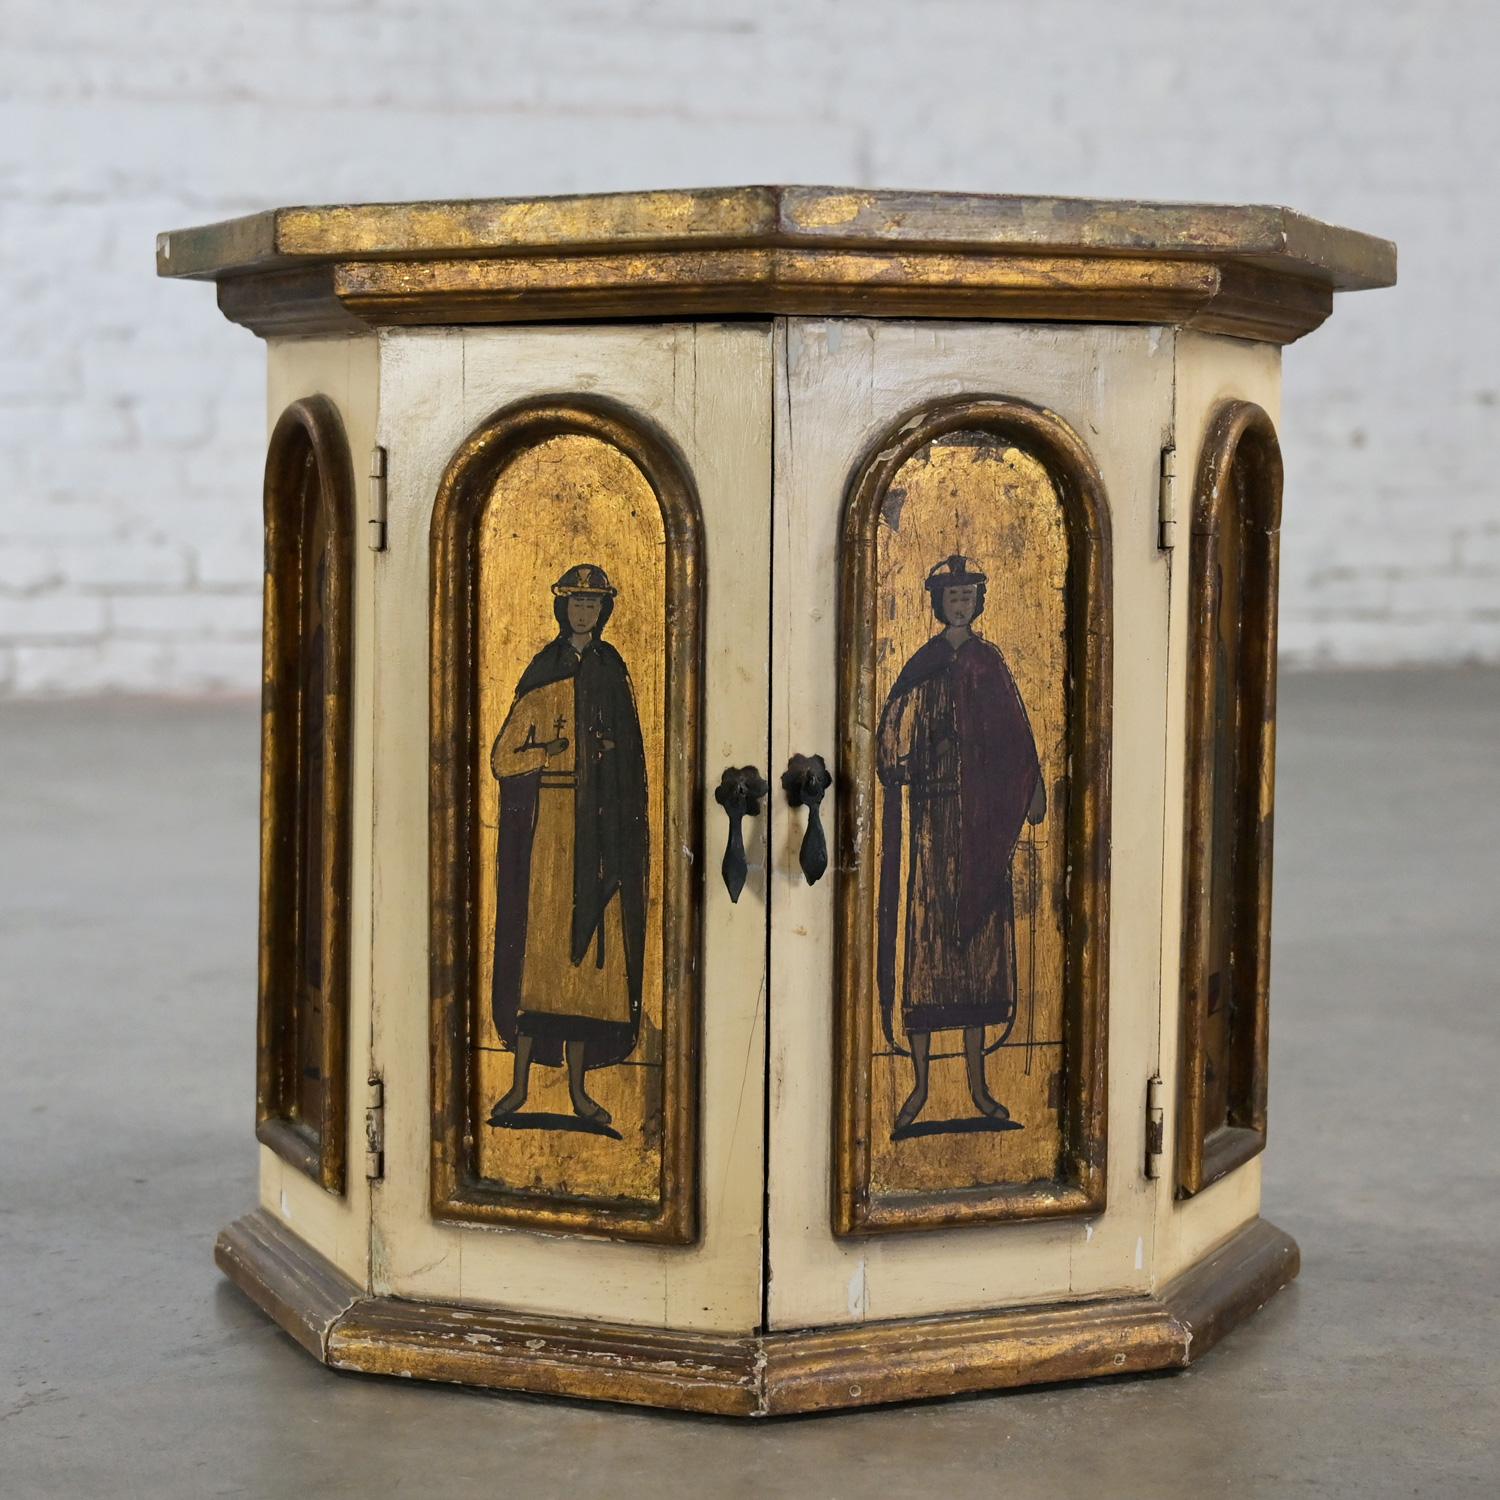 Incredible Spanish Revival Rustic Style Artes De Mexico Internationales SA octagon hand painted side table, drum table, or cabinet with open storage. This piece has been attributed based upon archived research including online sources, vintage